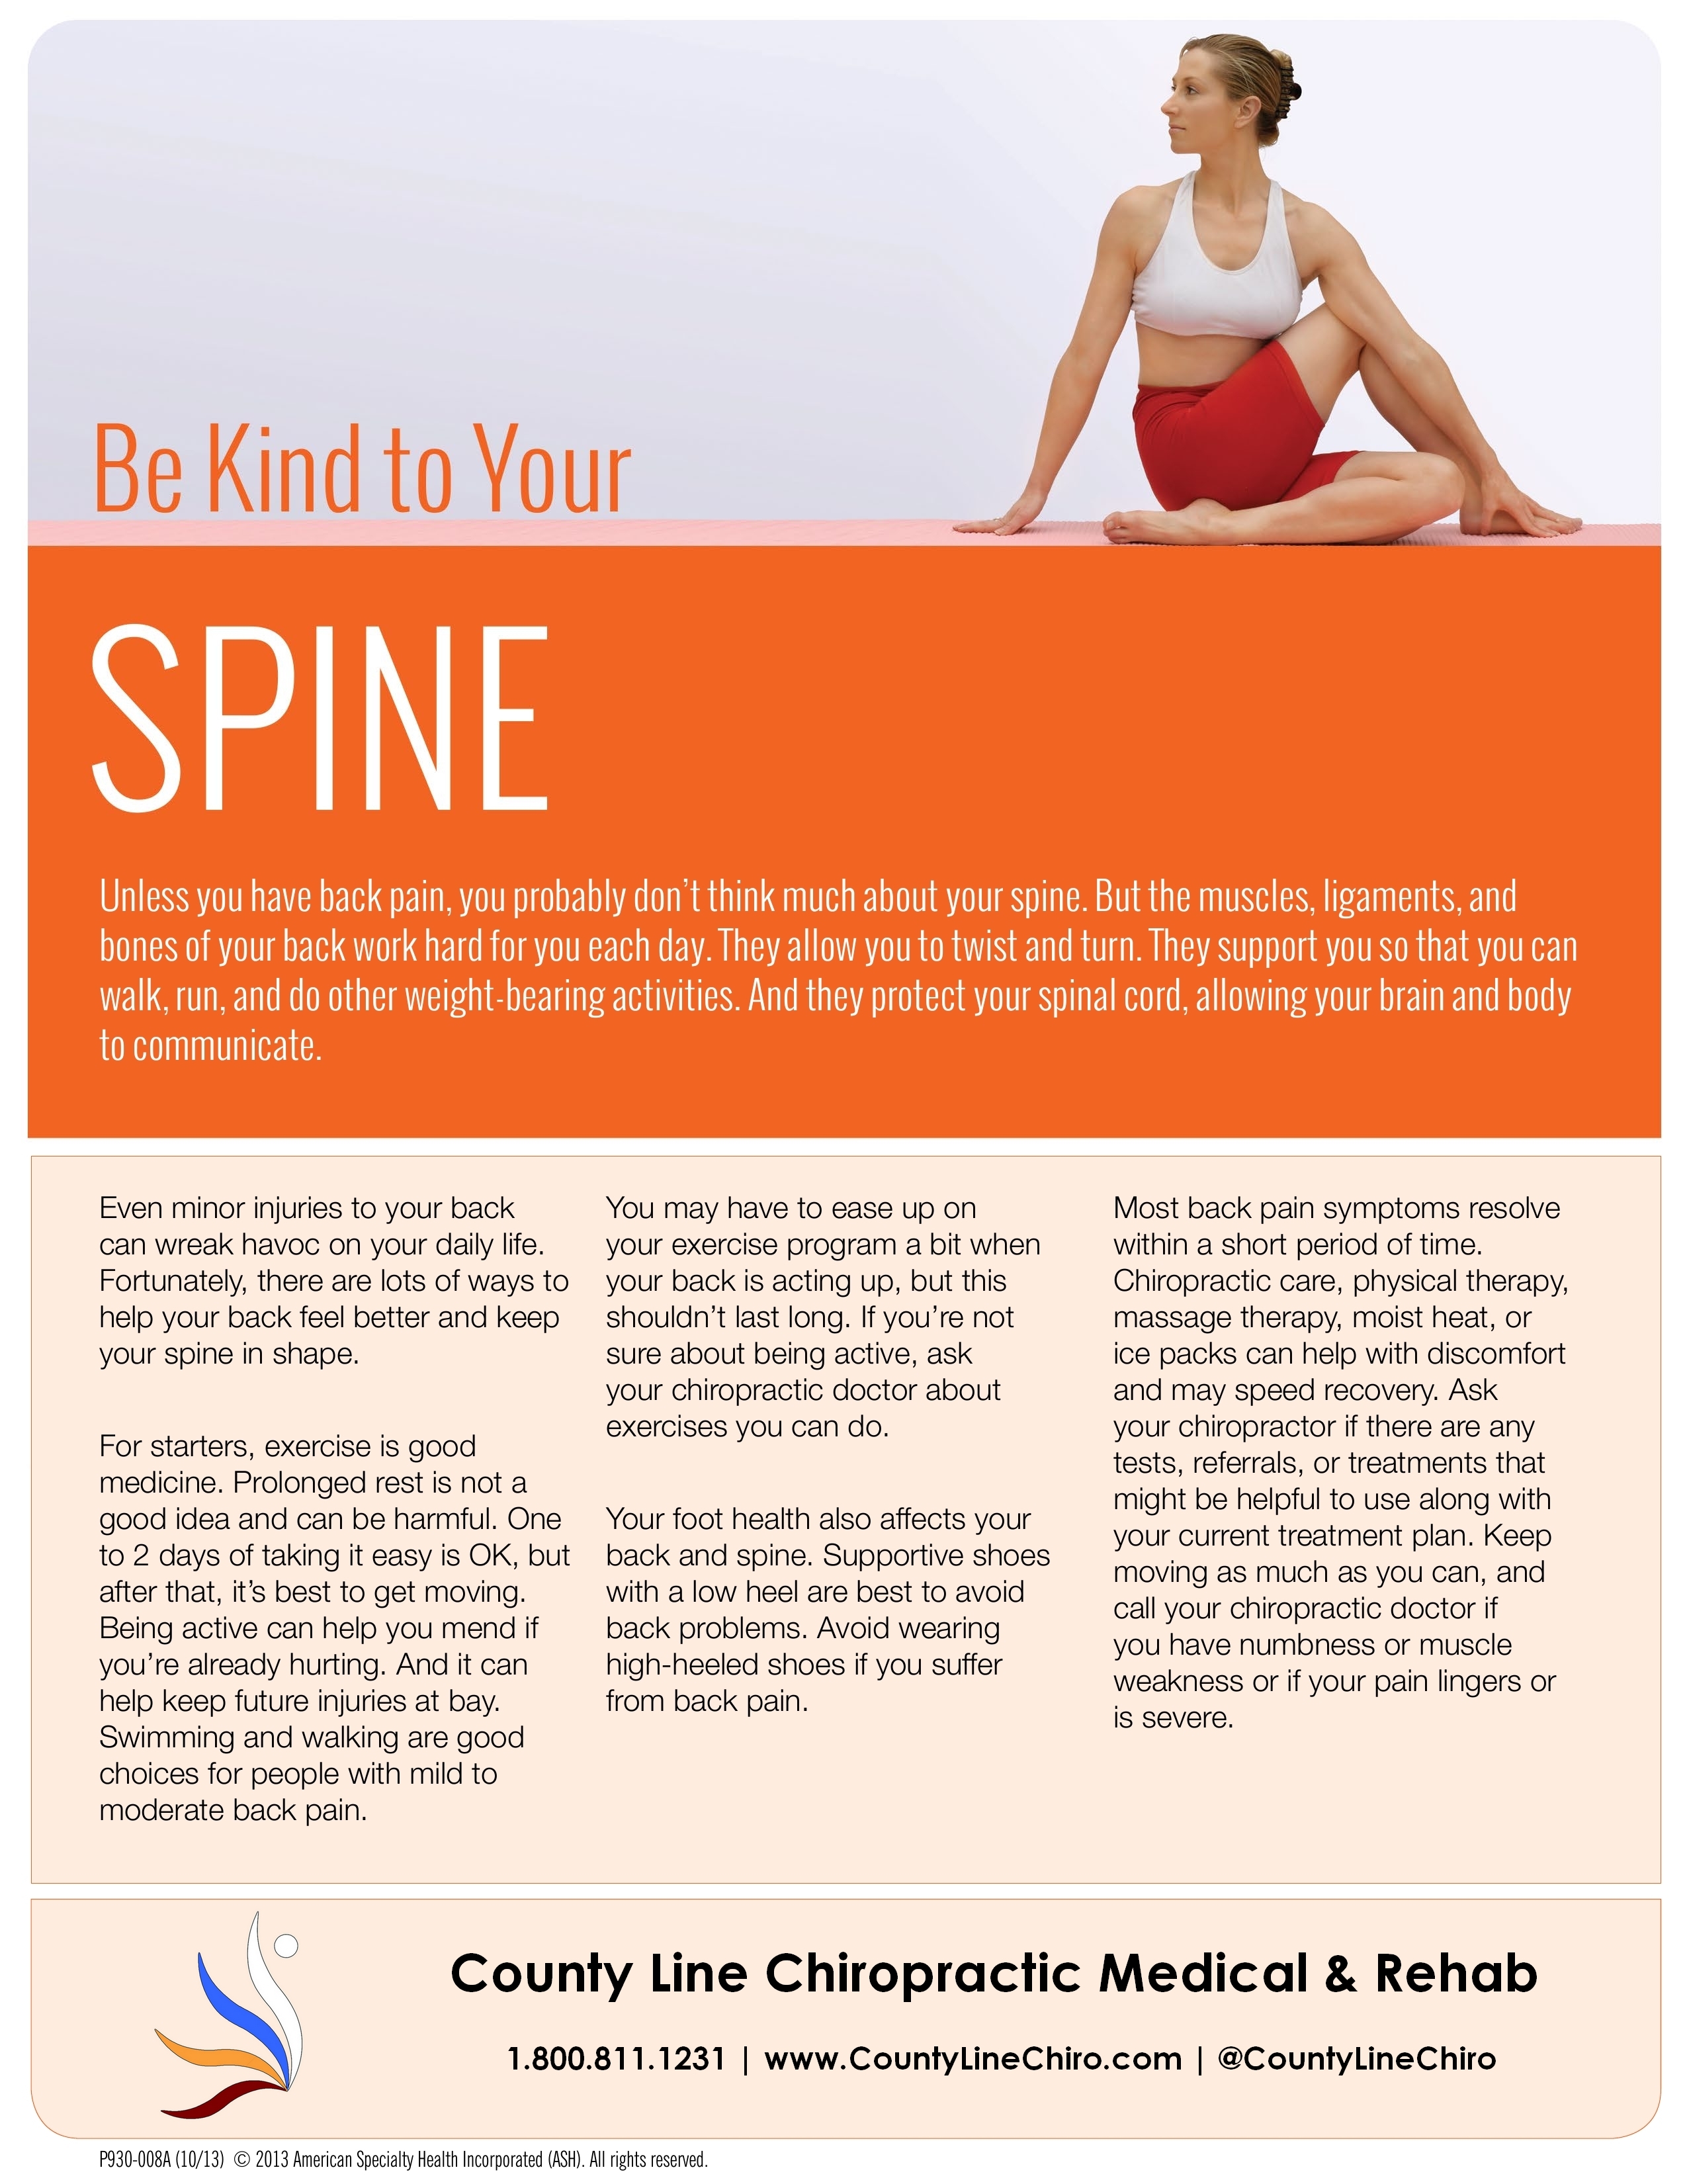 Be Kind to Your Spine